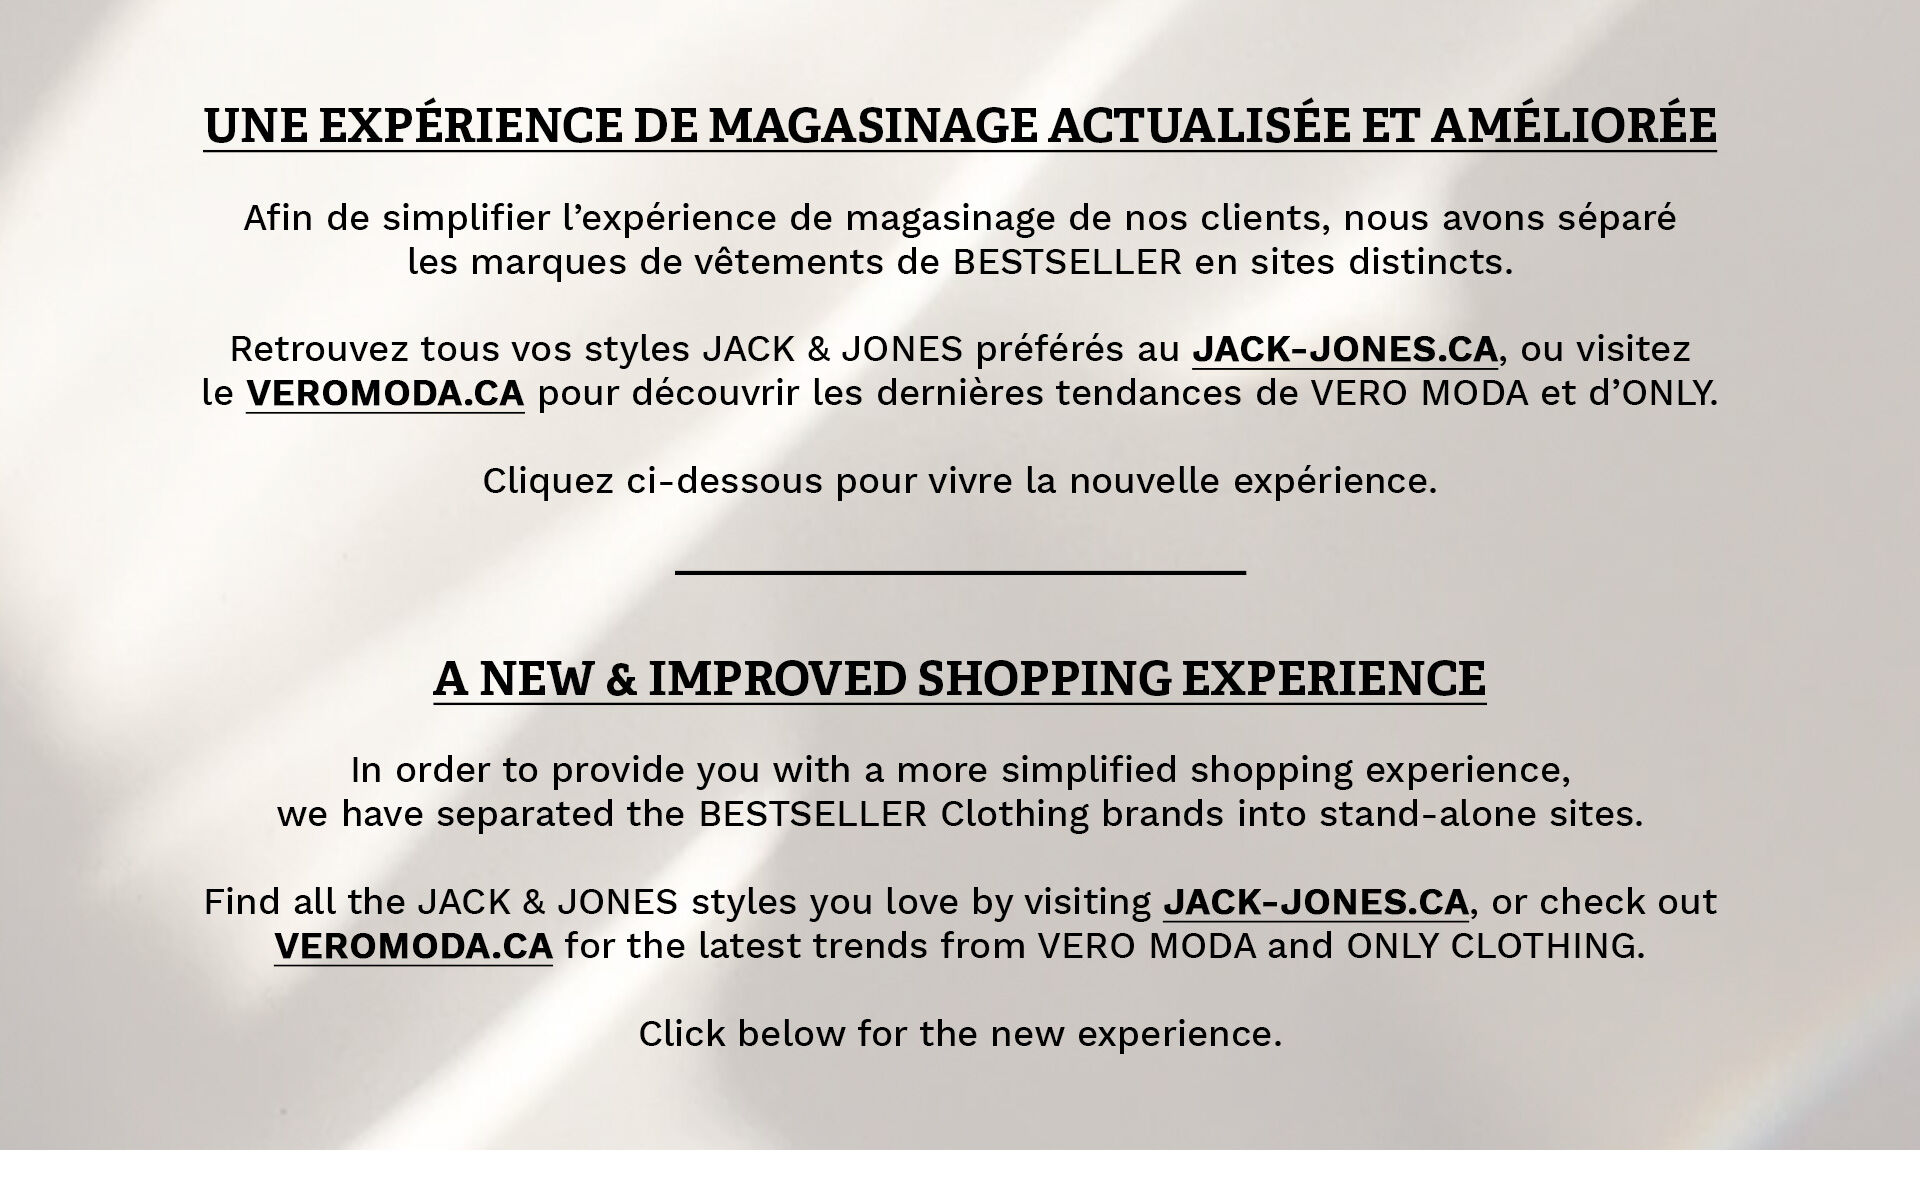 A new & improved shopping experience